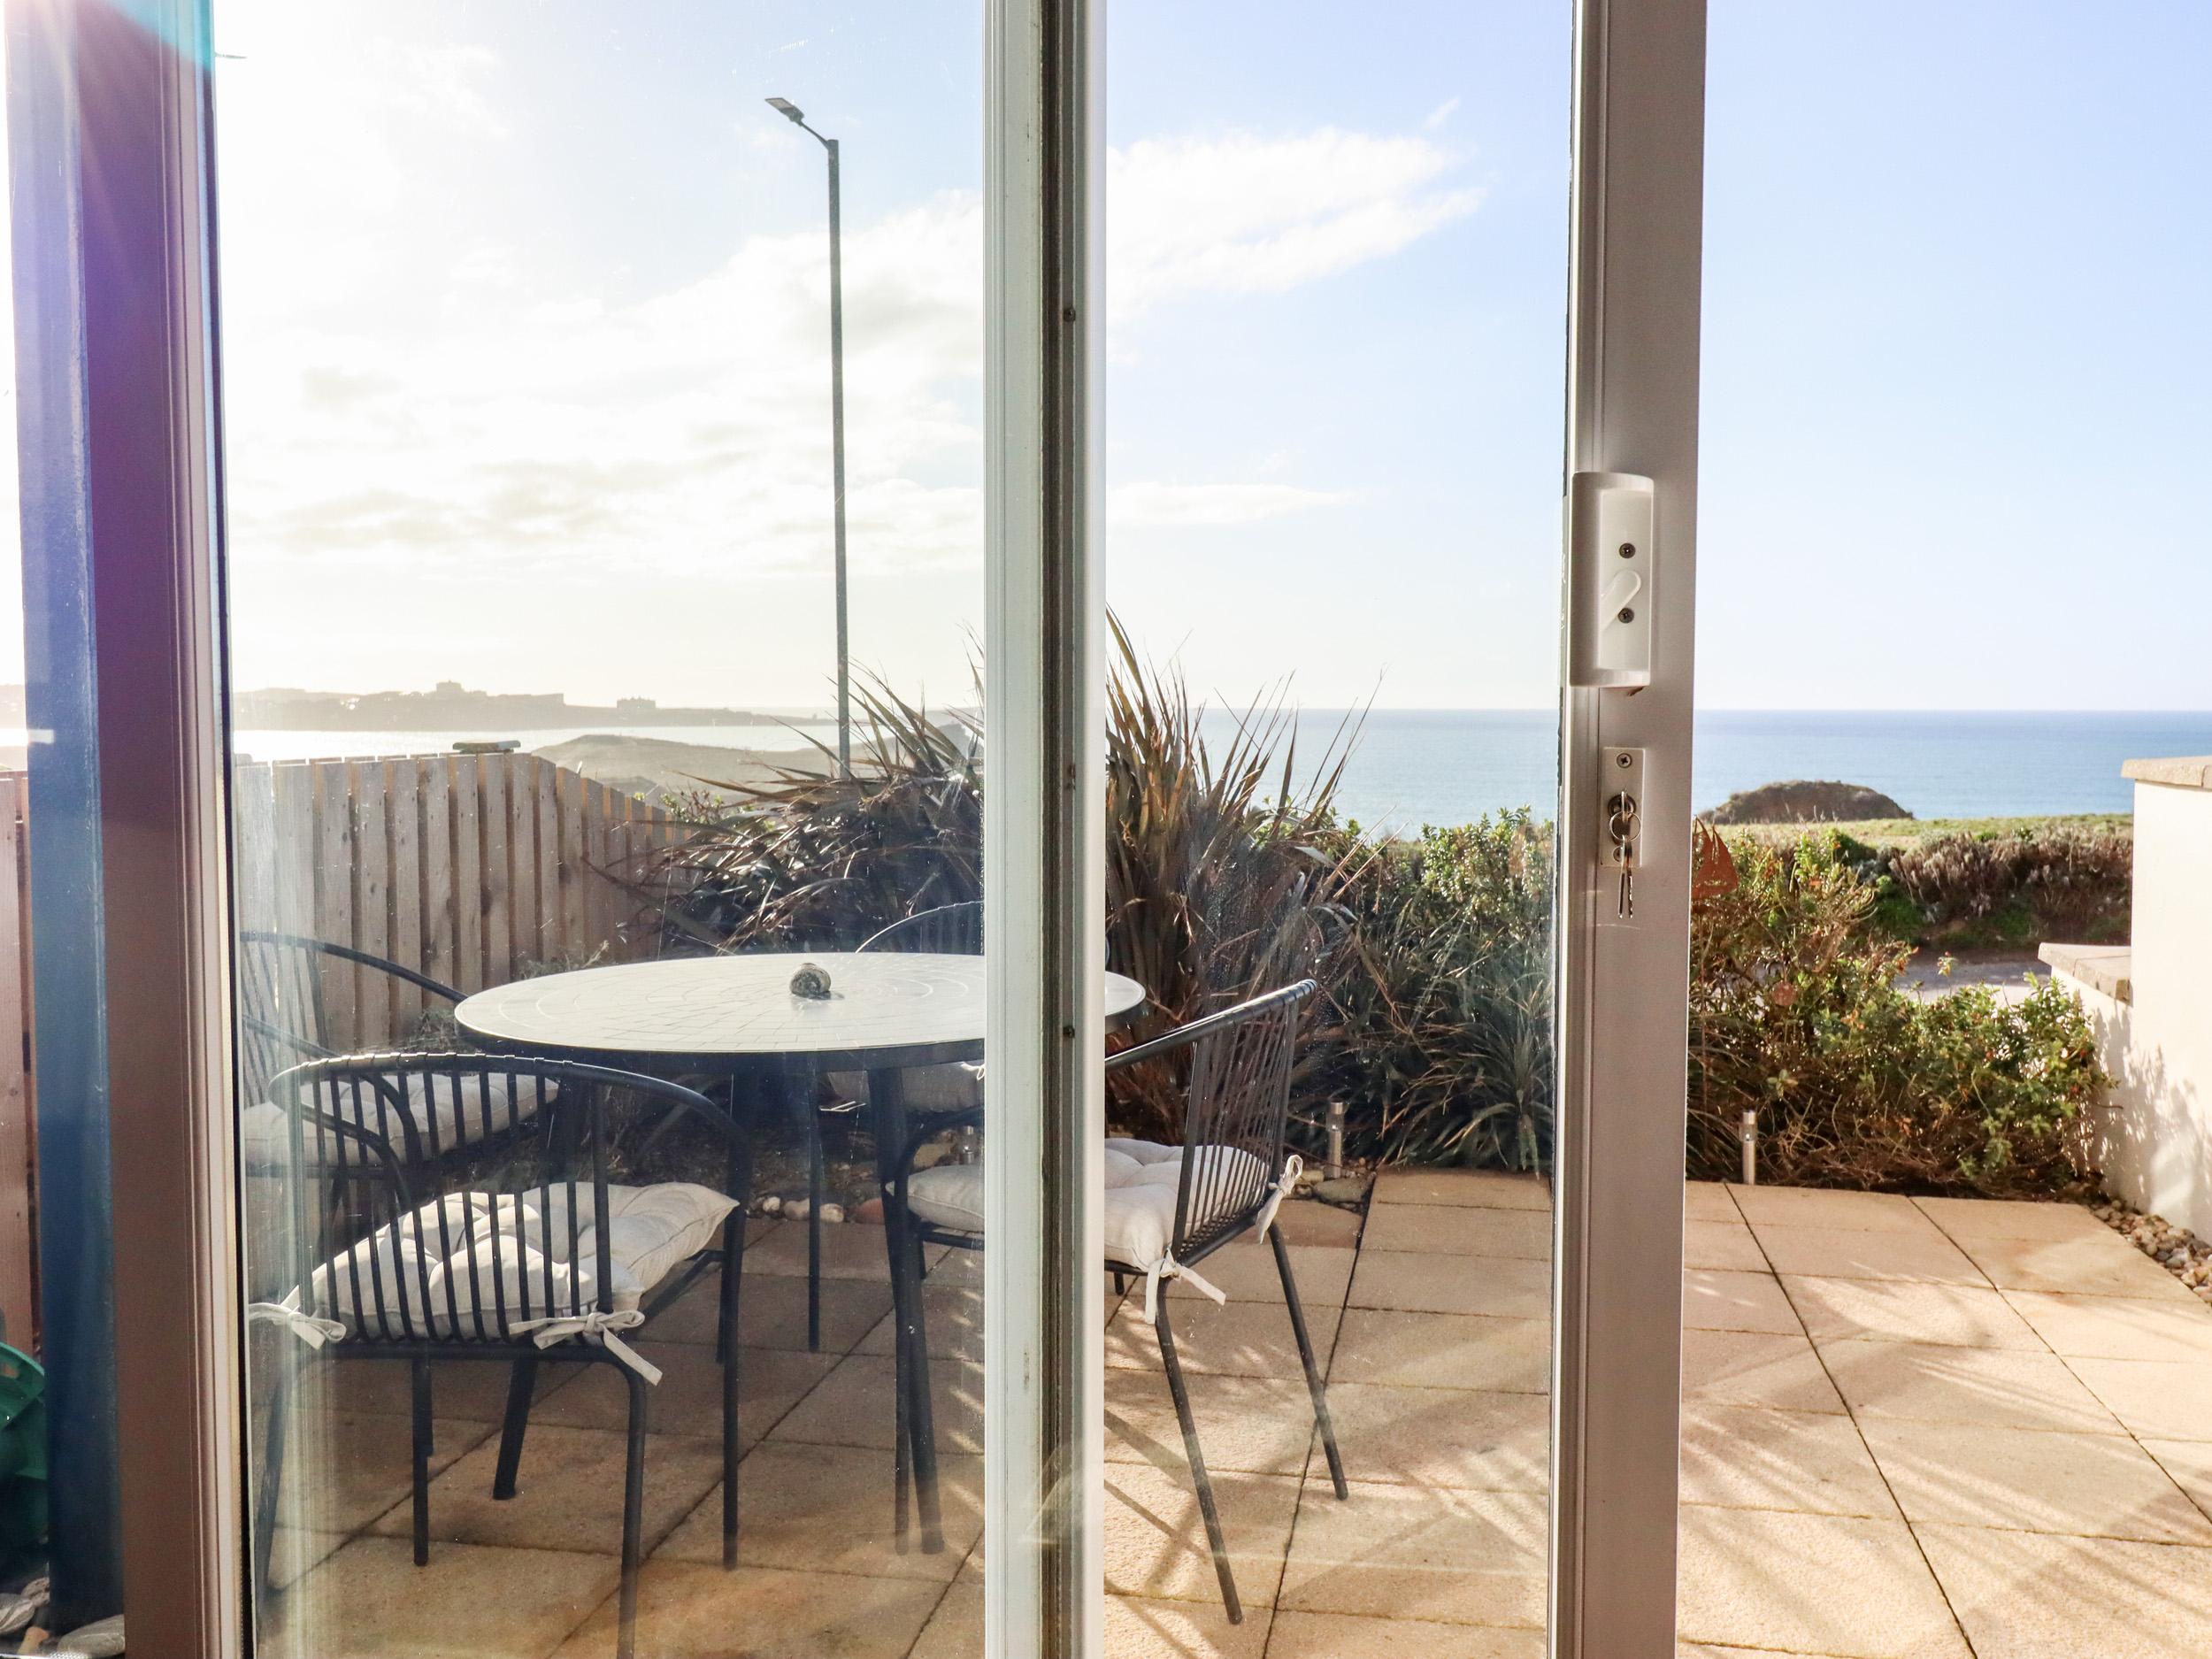 Holiday Cottage Reviews for Flat 2 - Self Catering Property in Newquay, Cornwall Inc Scilly